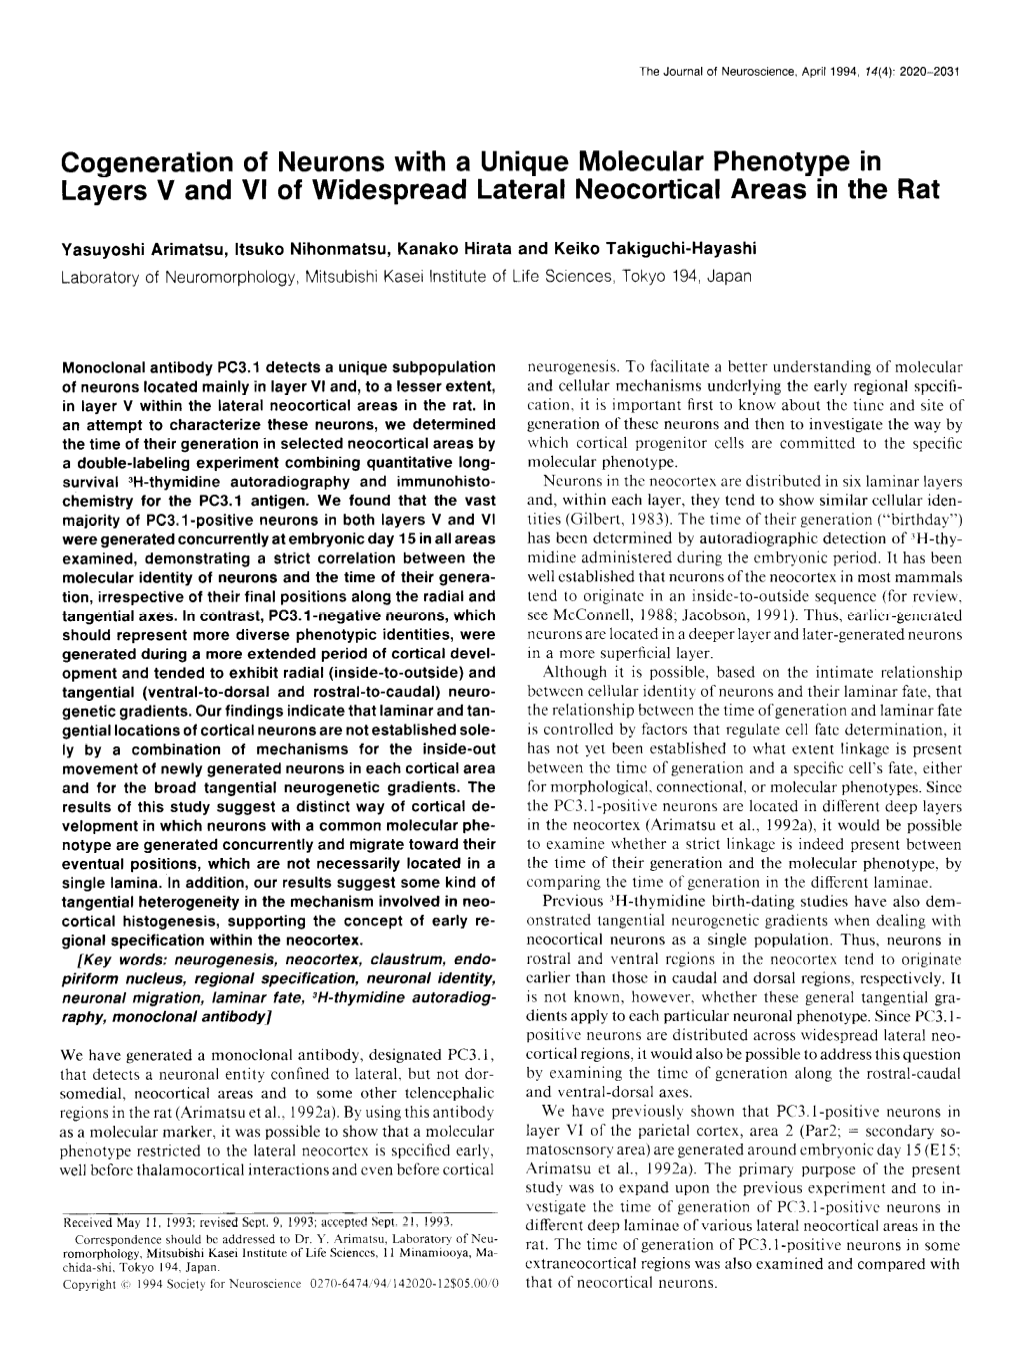 Cogeneration of Neurons with a Unique Molecular Phenotype in Layers V and VI of Widespread Lateral Neocortical Areas in the Rat